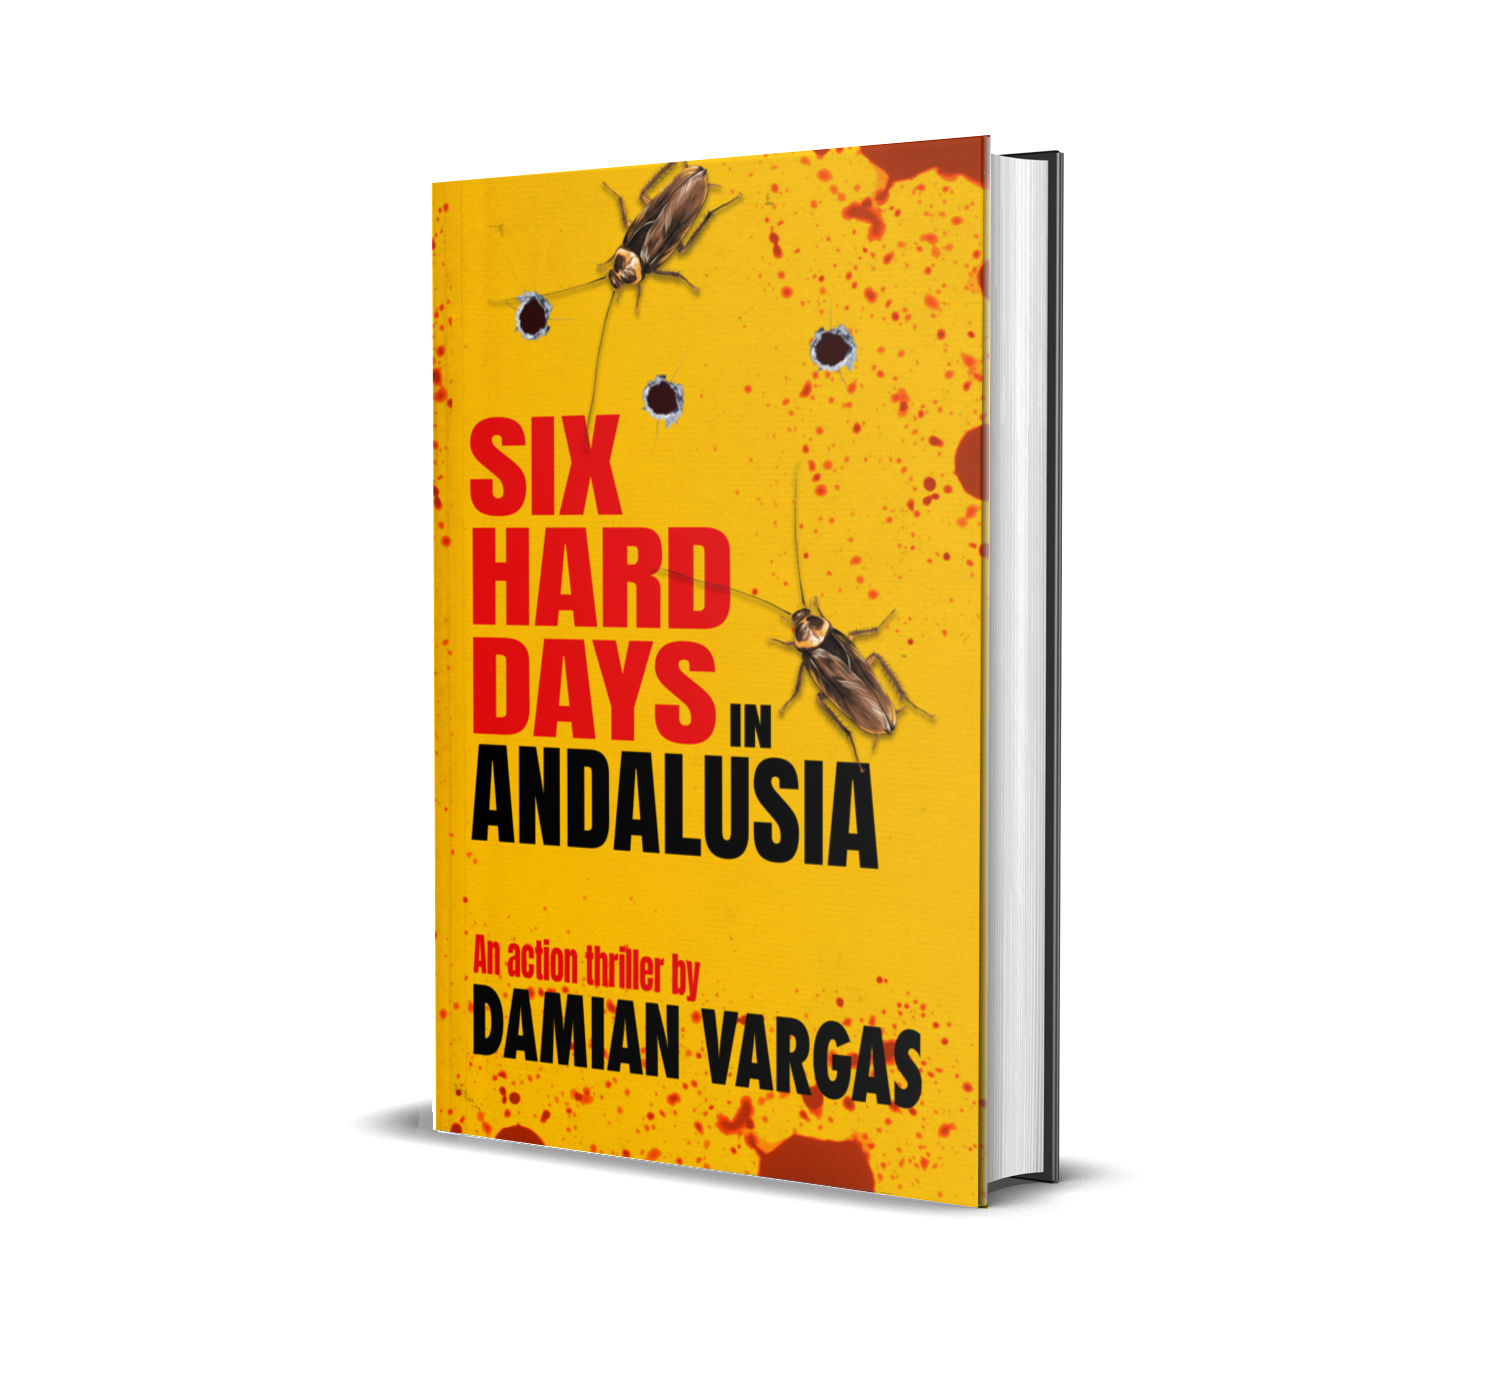 Six Hard Days in Andalusia by Damian Vargas